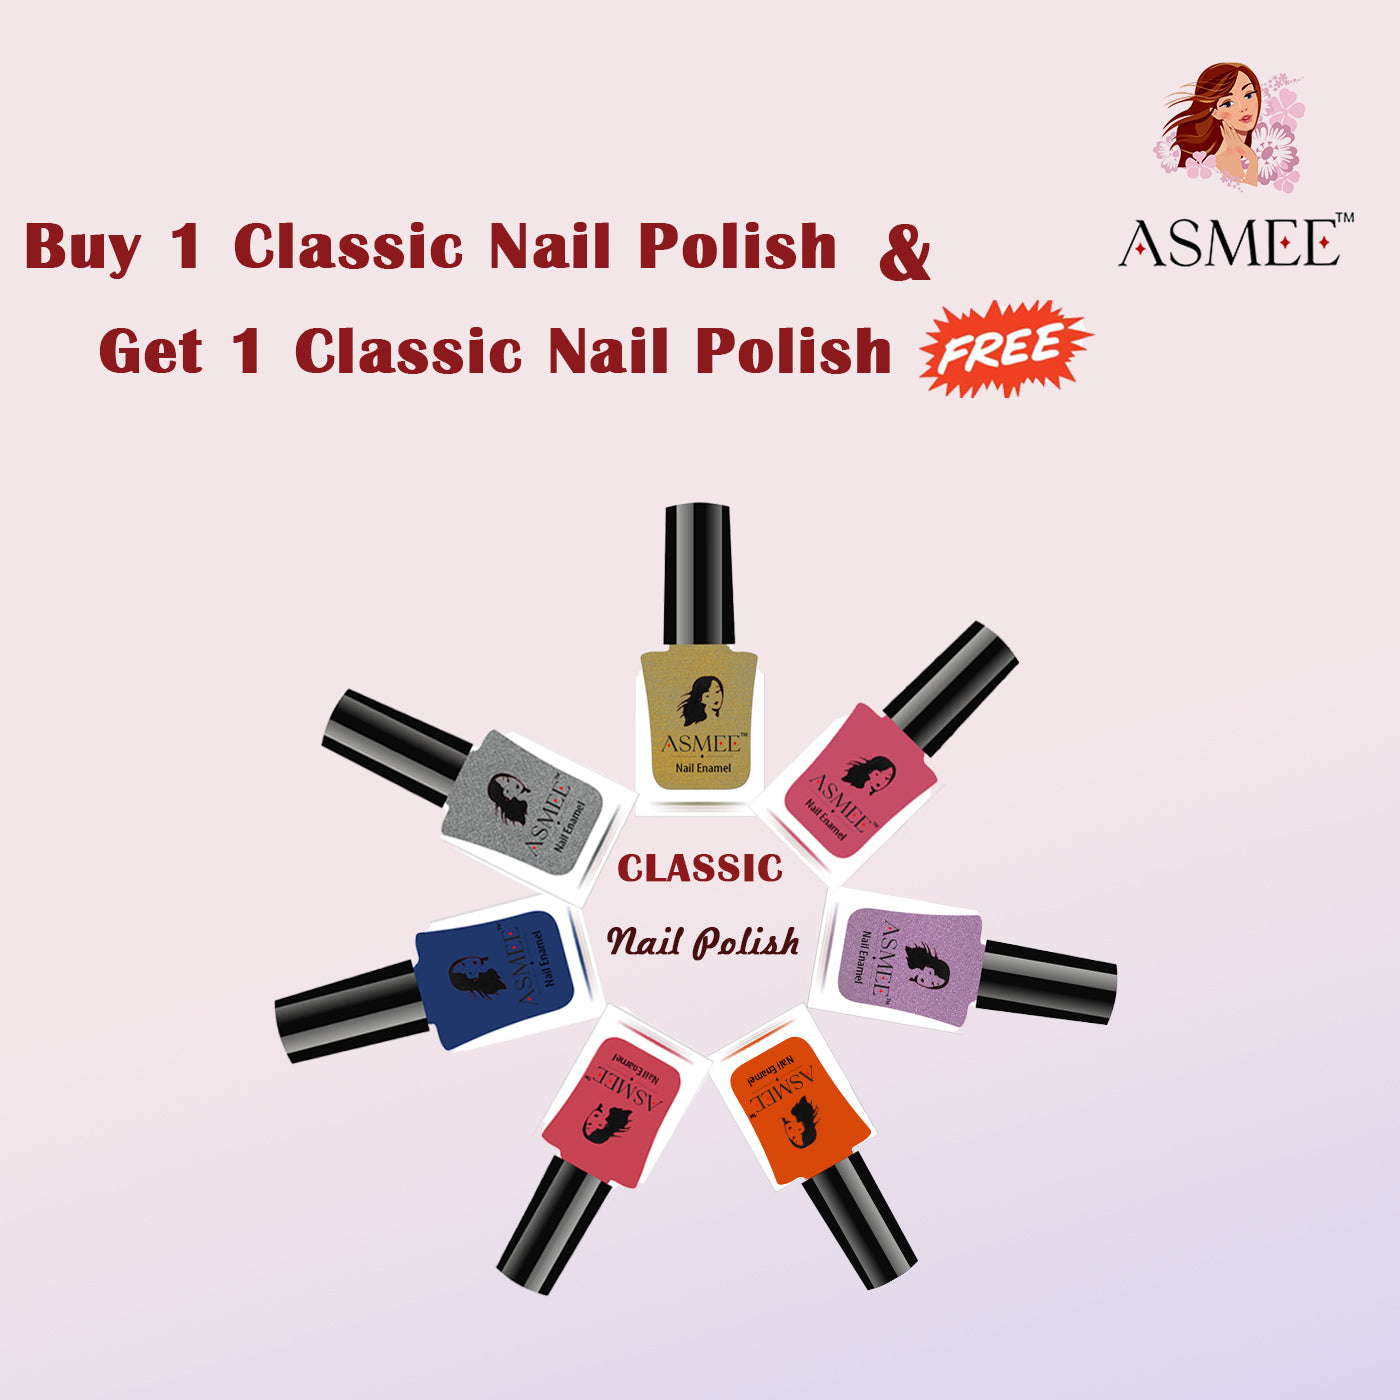 8ml Nail Polish Safe Ingredients Quick Dry Smooth Texture Excellent  Saturation Bright Color Show Unique Charm Gelatinous Matte Finish Style  Semi-permanent Nail Varnish Nail Supplies - Walmart.com